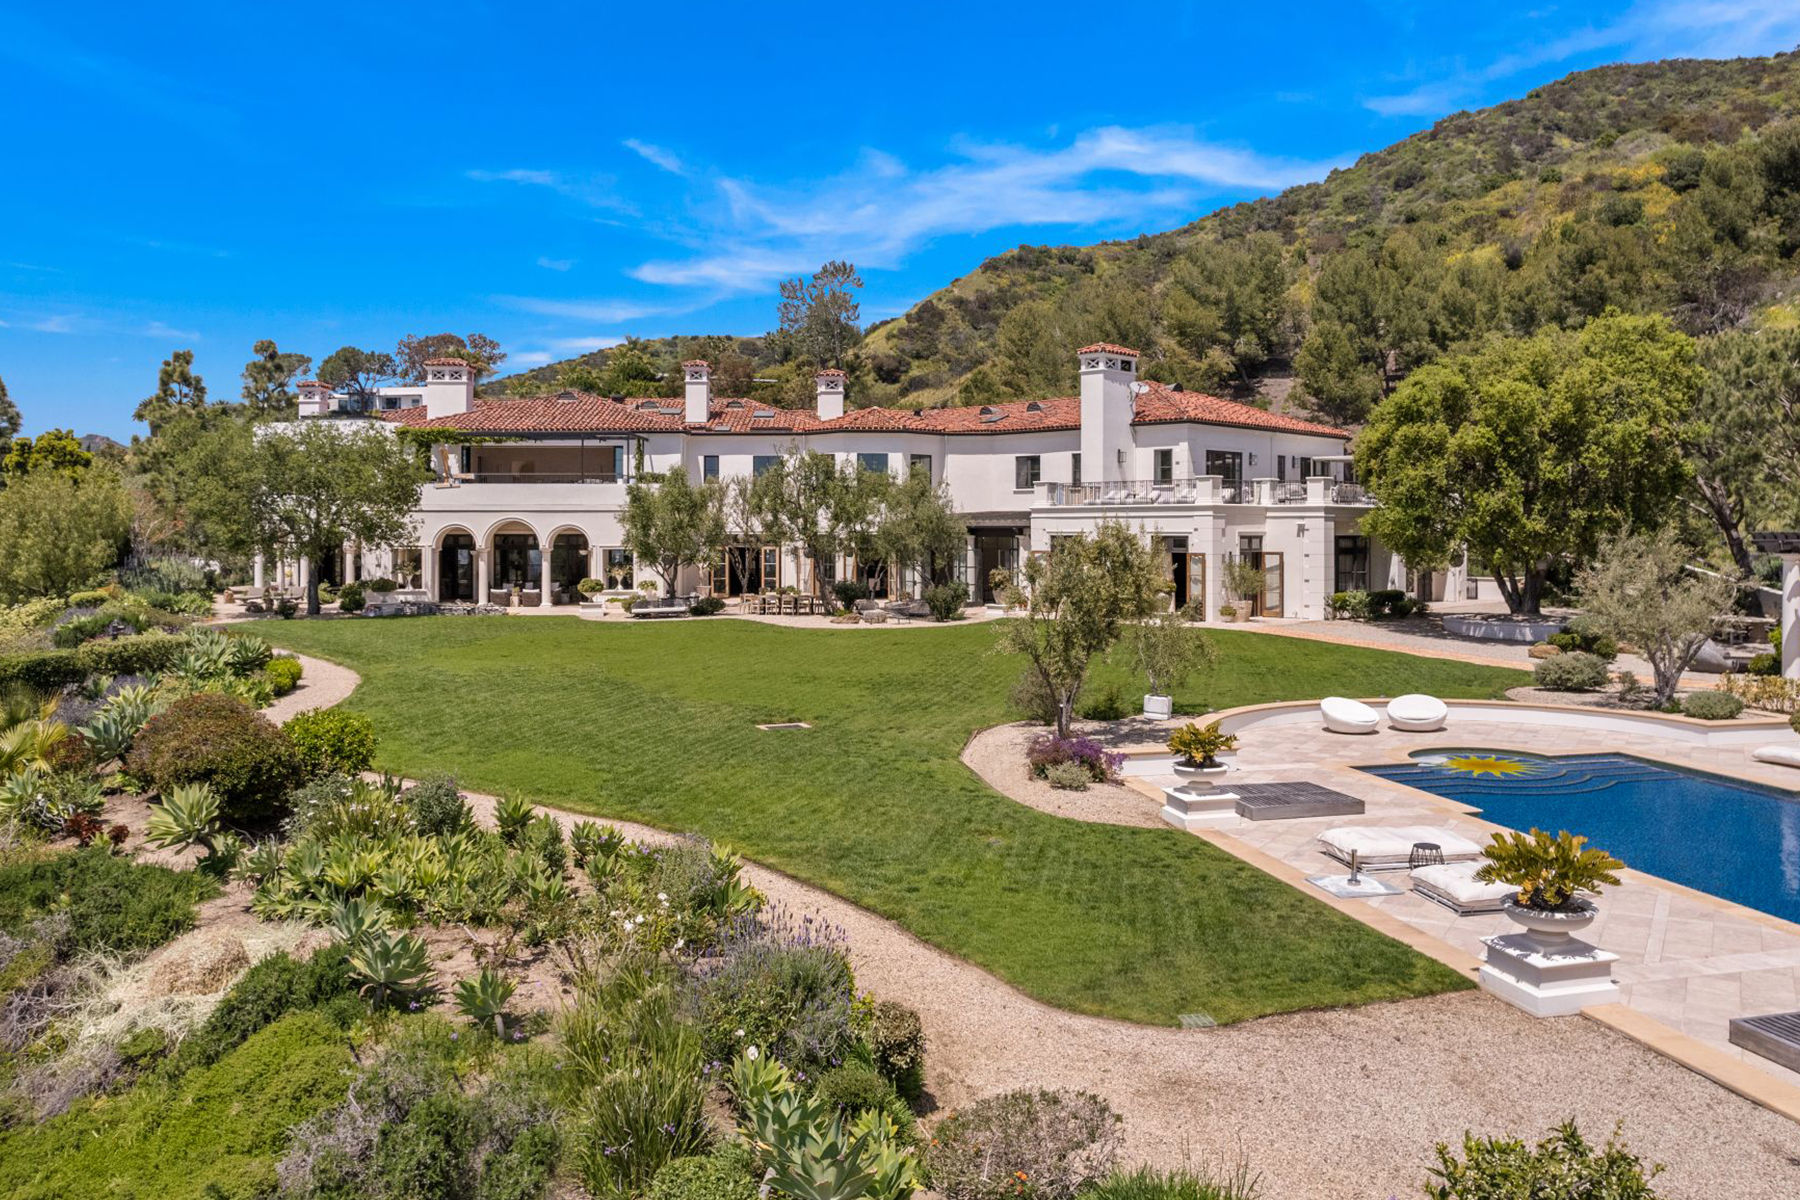 Drake is selling his Beverly Hills mansion for USD 88 million